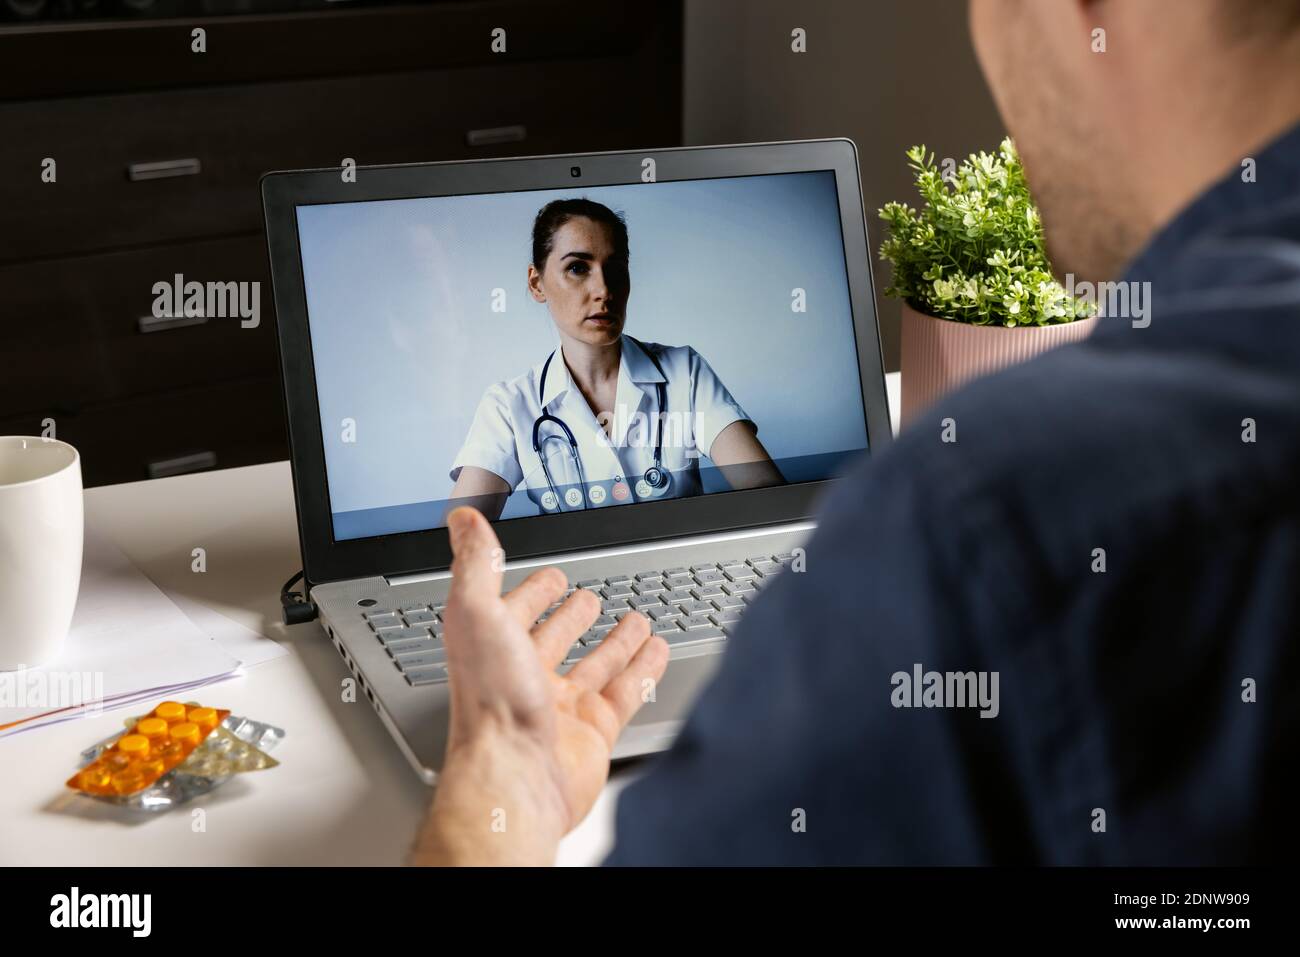 online doctor consultation - man talking with physician on laptop at home during telemedicine video call Stock Photo